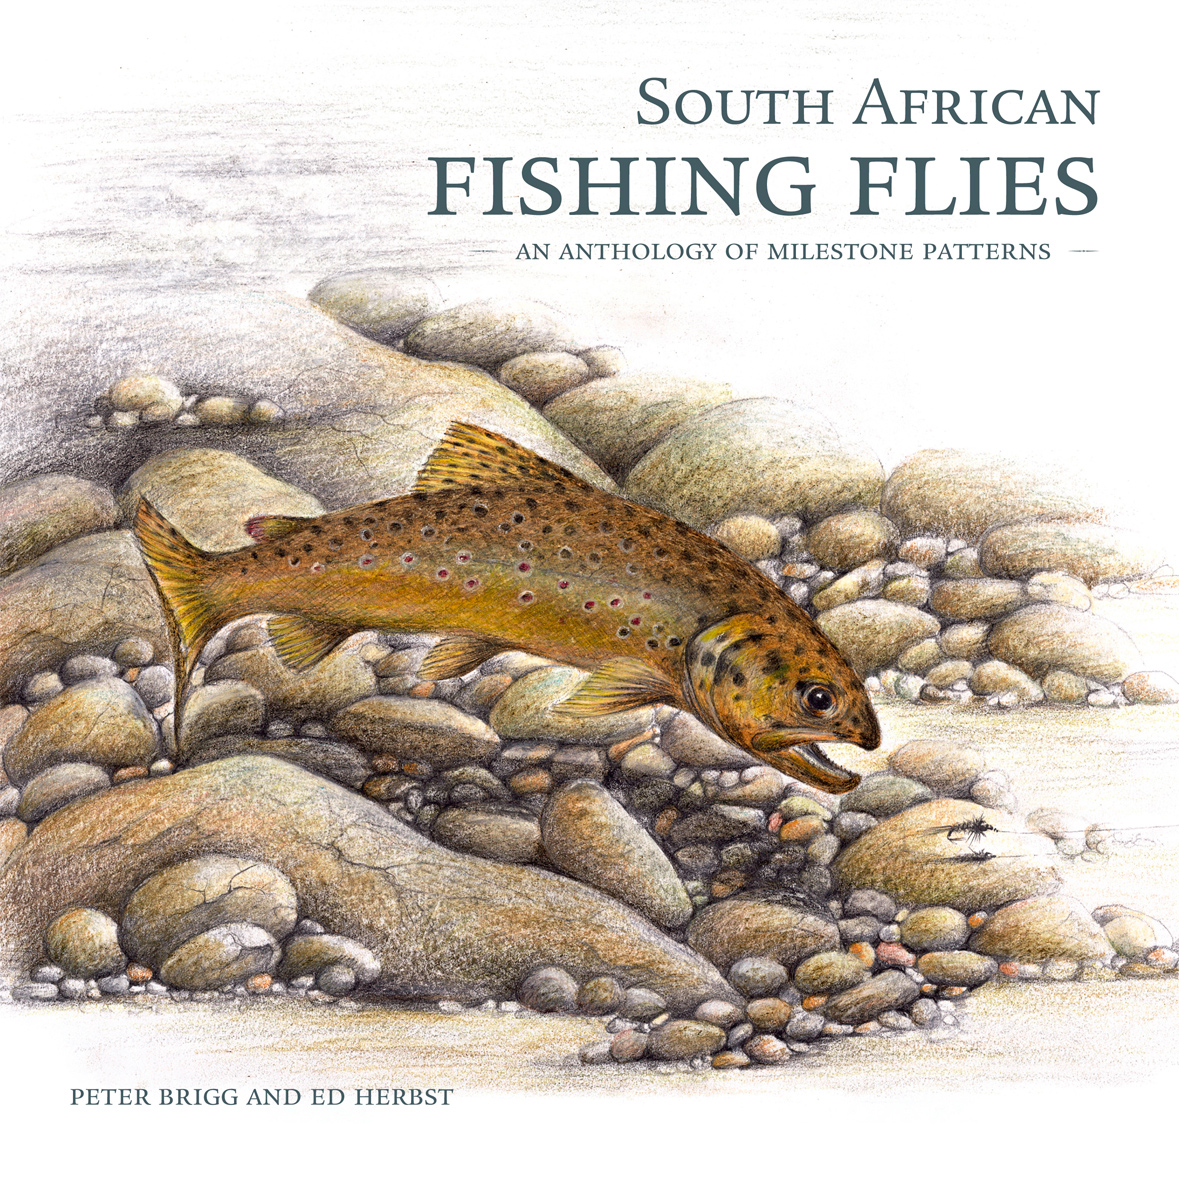 South African Fishing Flies by Brigg, Peter and Herbst, Ed